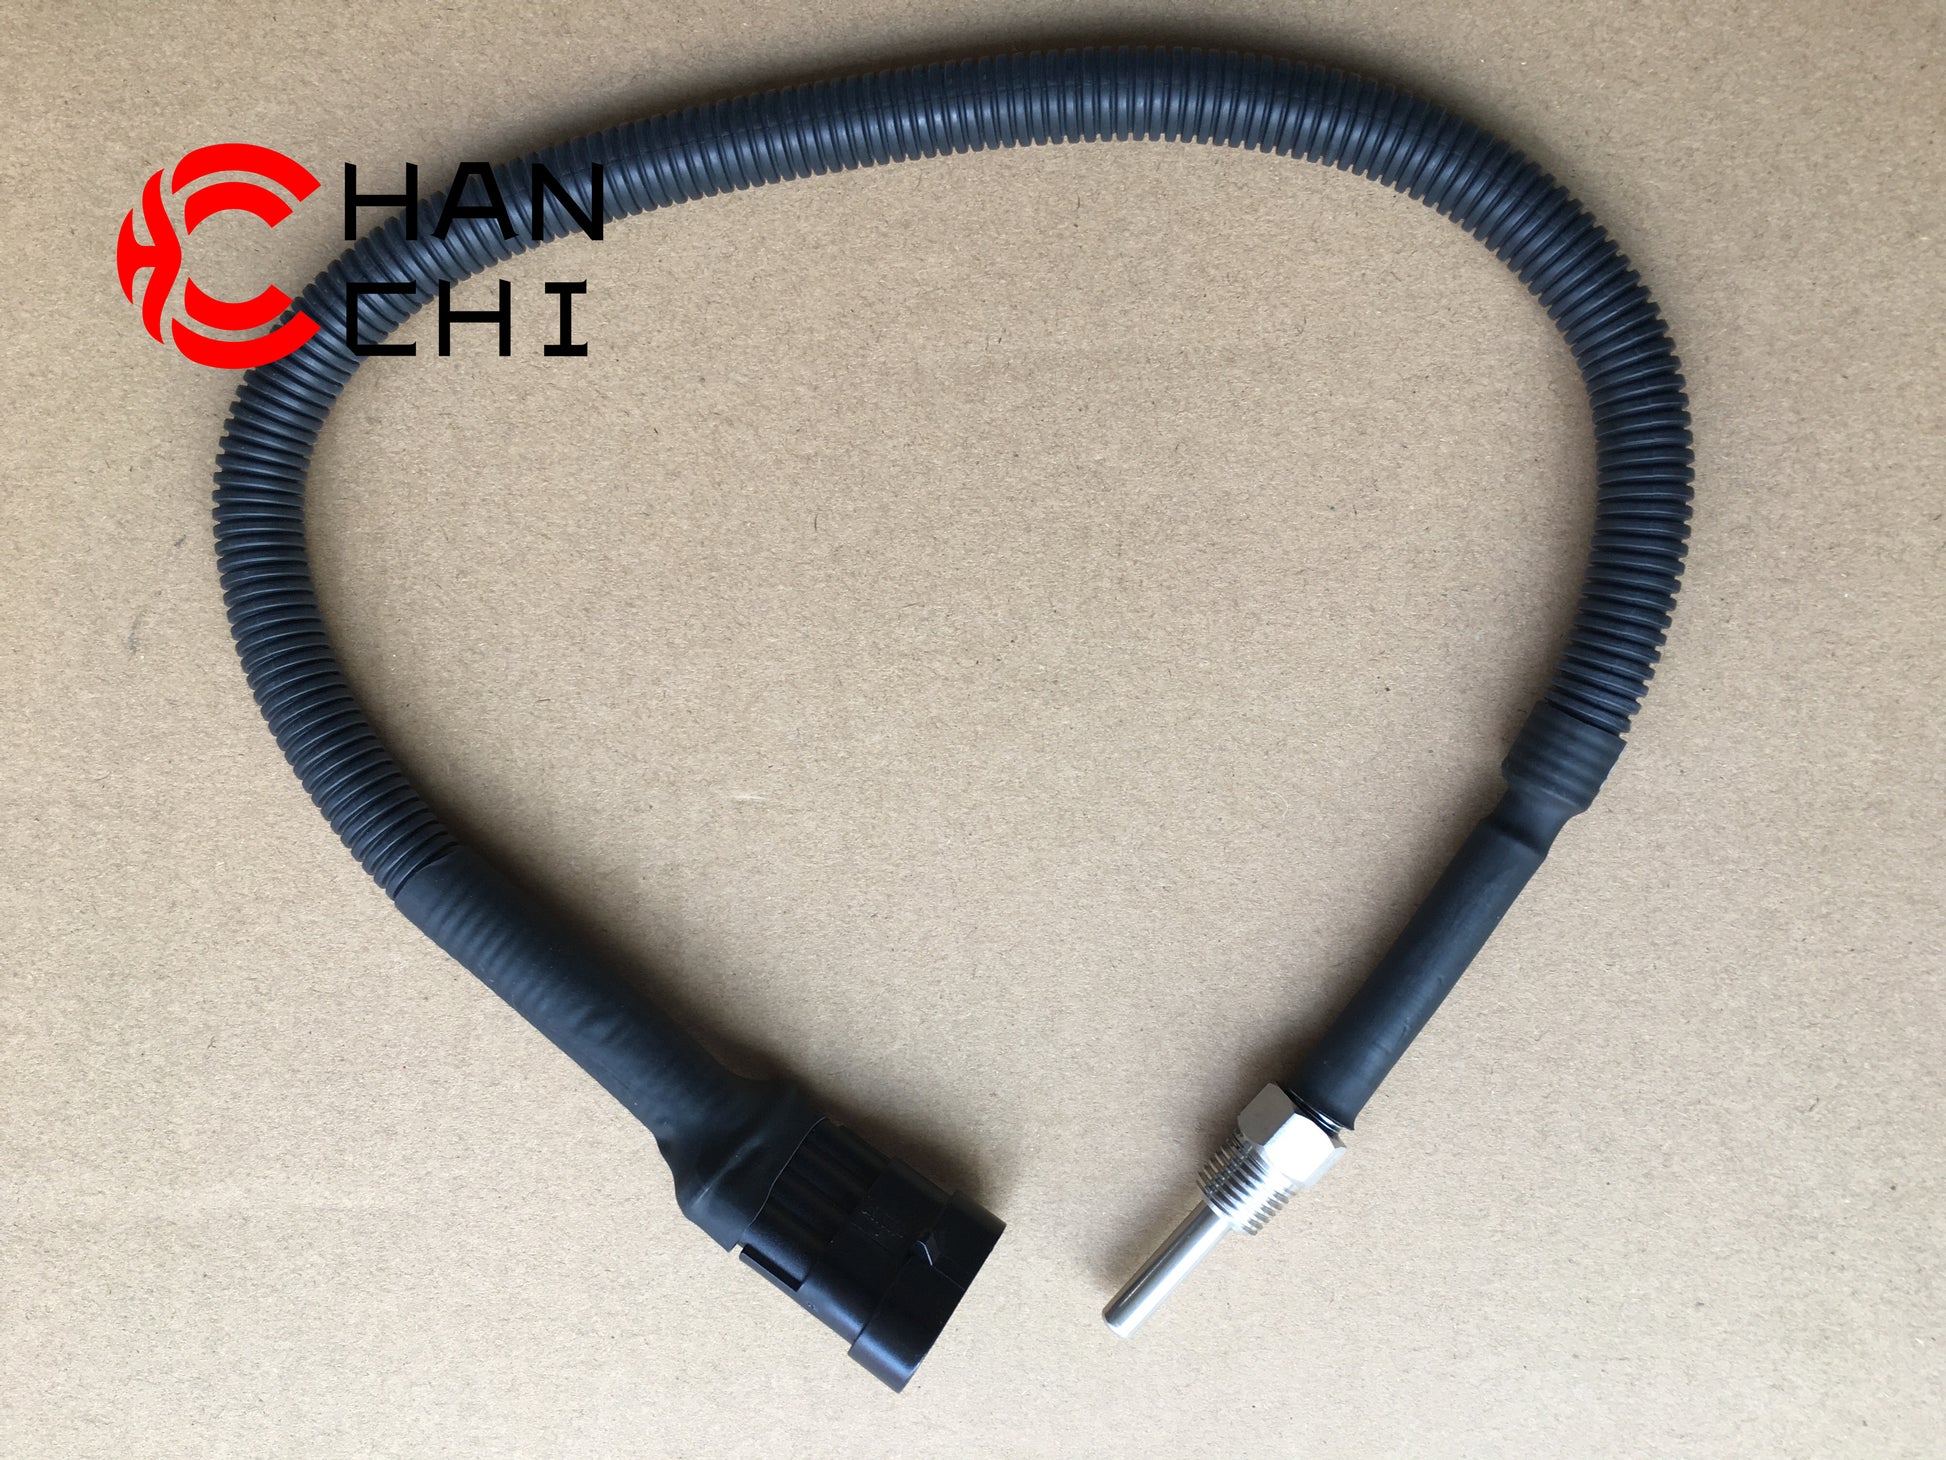 OEM: 102005000078 CAMAMaterial: ABS metalColor: black silverOrigin: Made in ChinaWeight: 100gPacking List: 1* Intercooler Temperature Sensor More ServiceWe can provide OEM Manufacturing serviceWe can Be your one-step solution for Auto PartsWe can provide technical scheme for you Feel Free to Contact Us, We will get back to you as soon as possible.